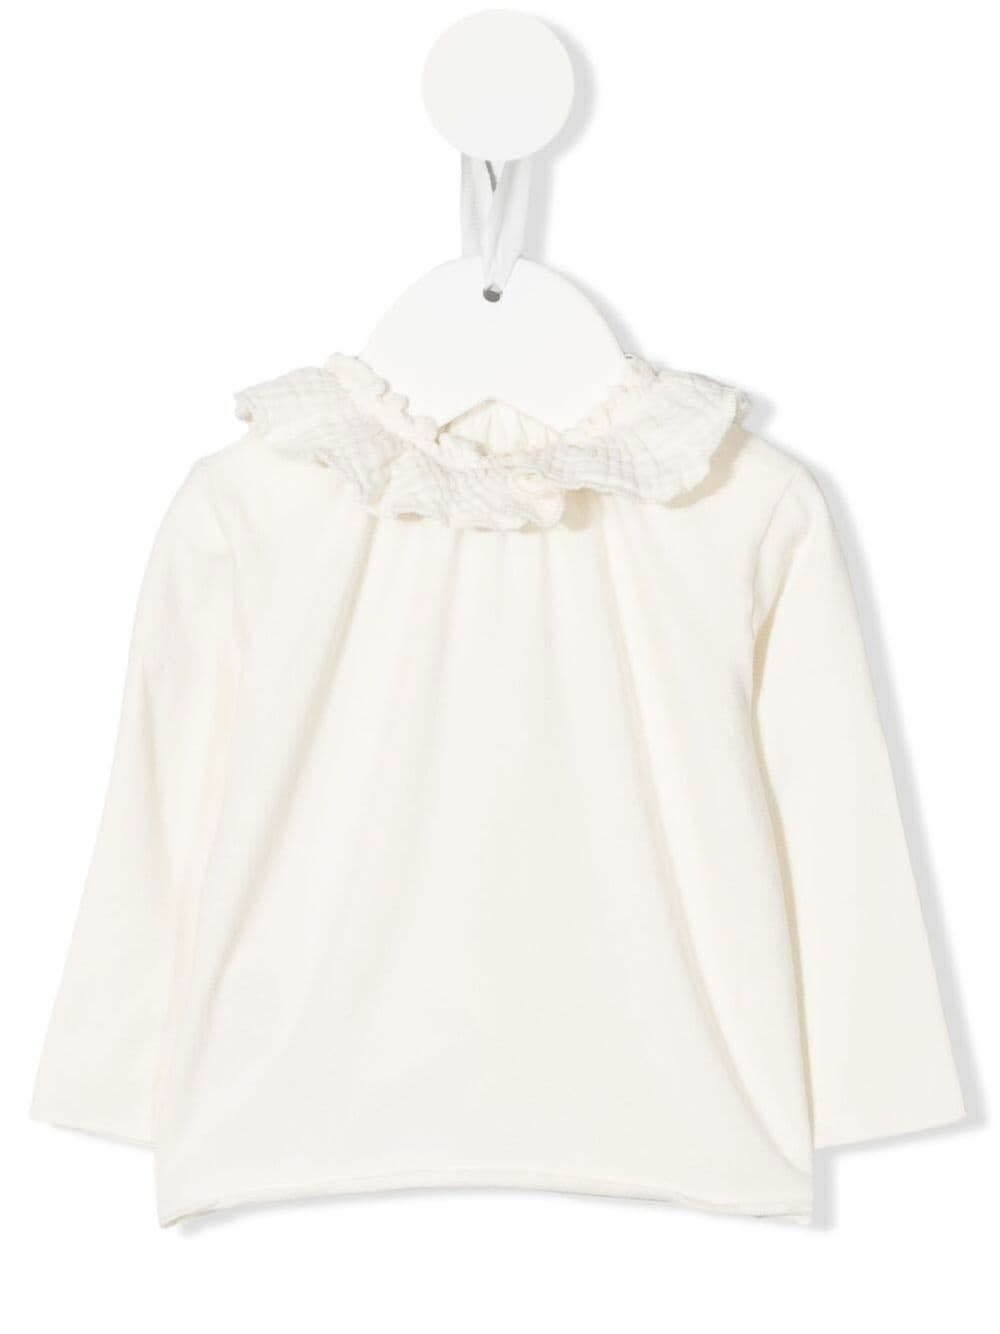 TEDDY &AMP; MINOU WHITE BABY BLOUSE WITH RUFFLES ON THE NECKLINE